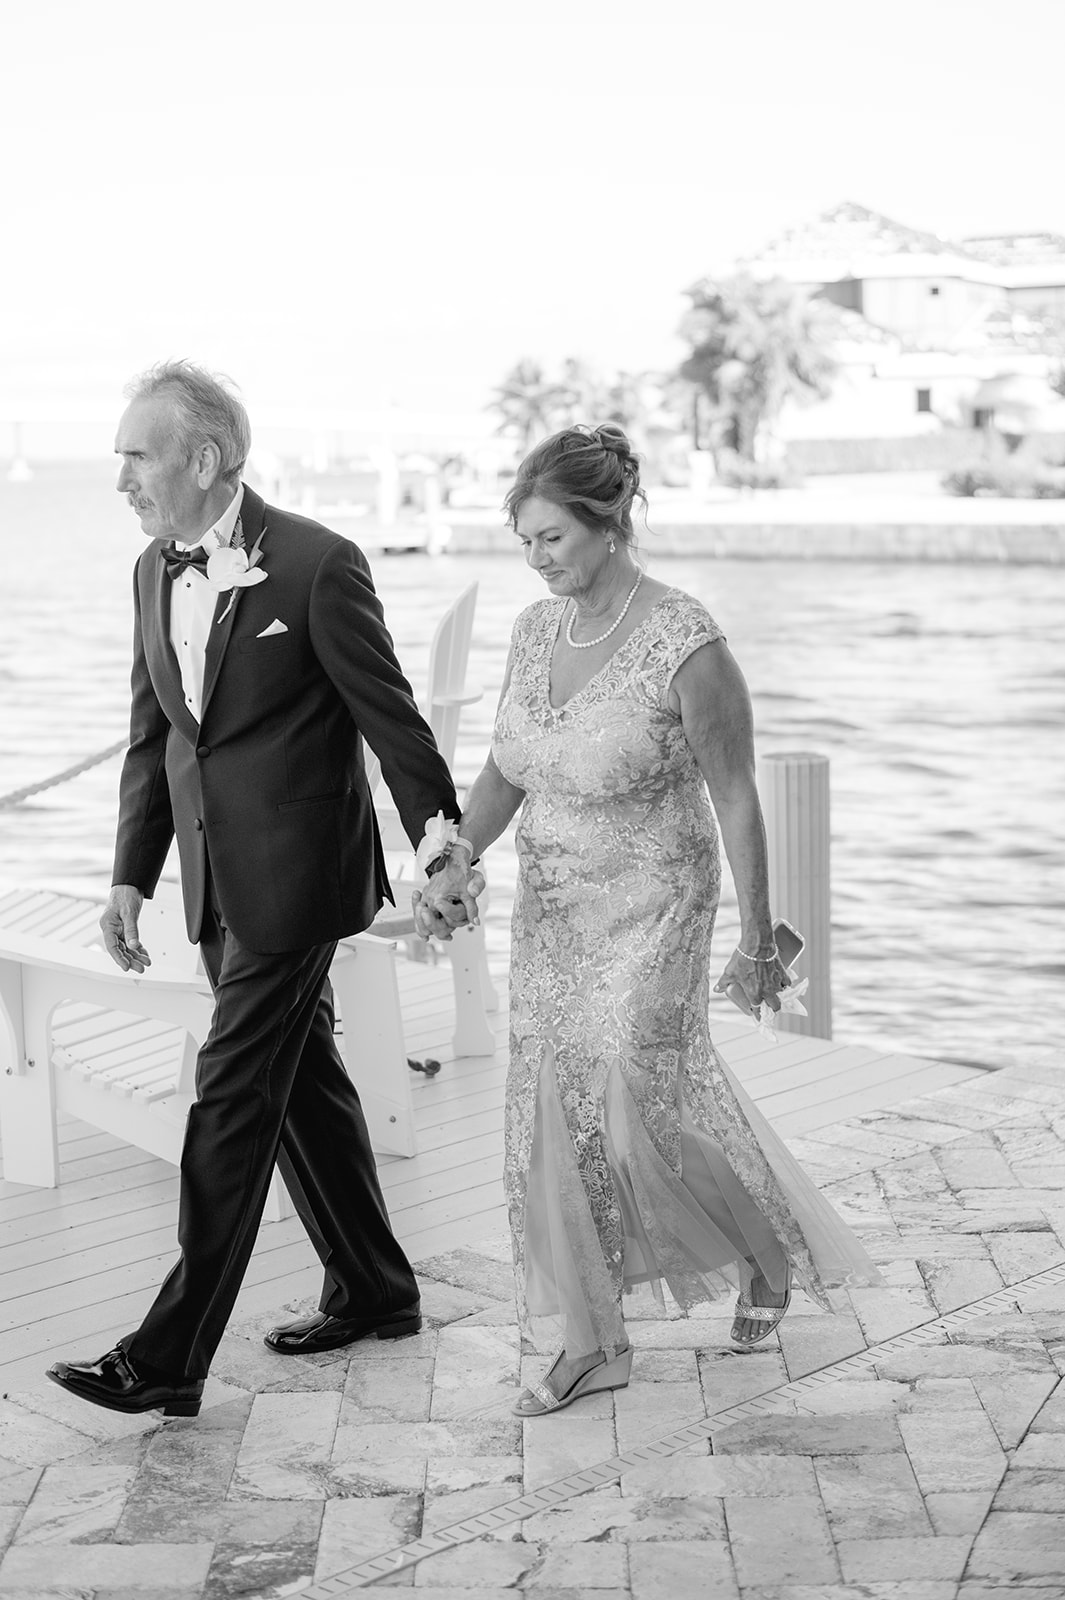 Naples Florida Fine Art Wedding Photographer Captures Love - A Story in Images
